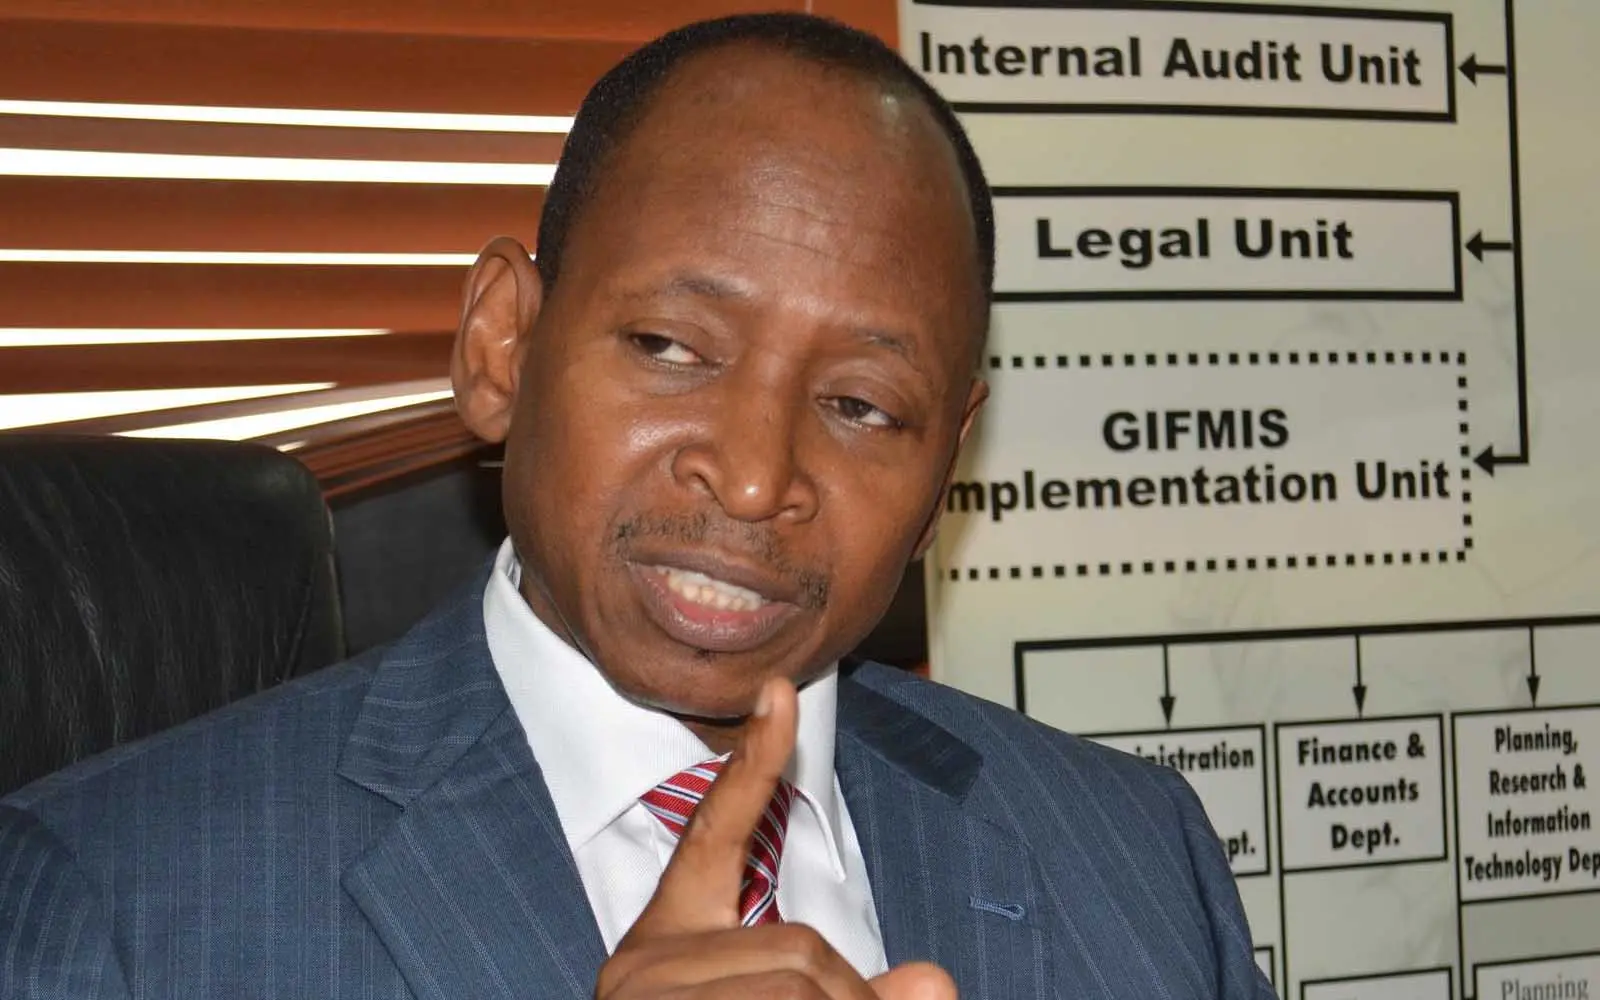 Alleged N109.4 Billion fraud: Trial Of Ex-AGF Stalled Over Missing Statement